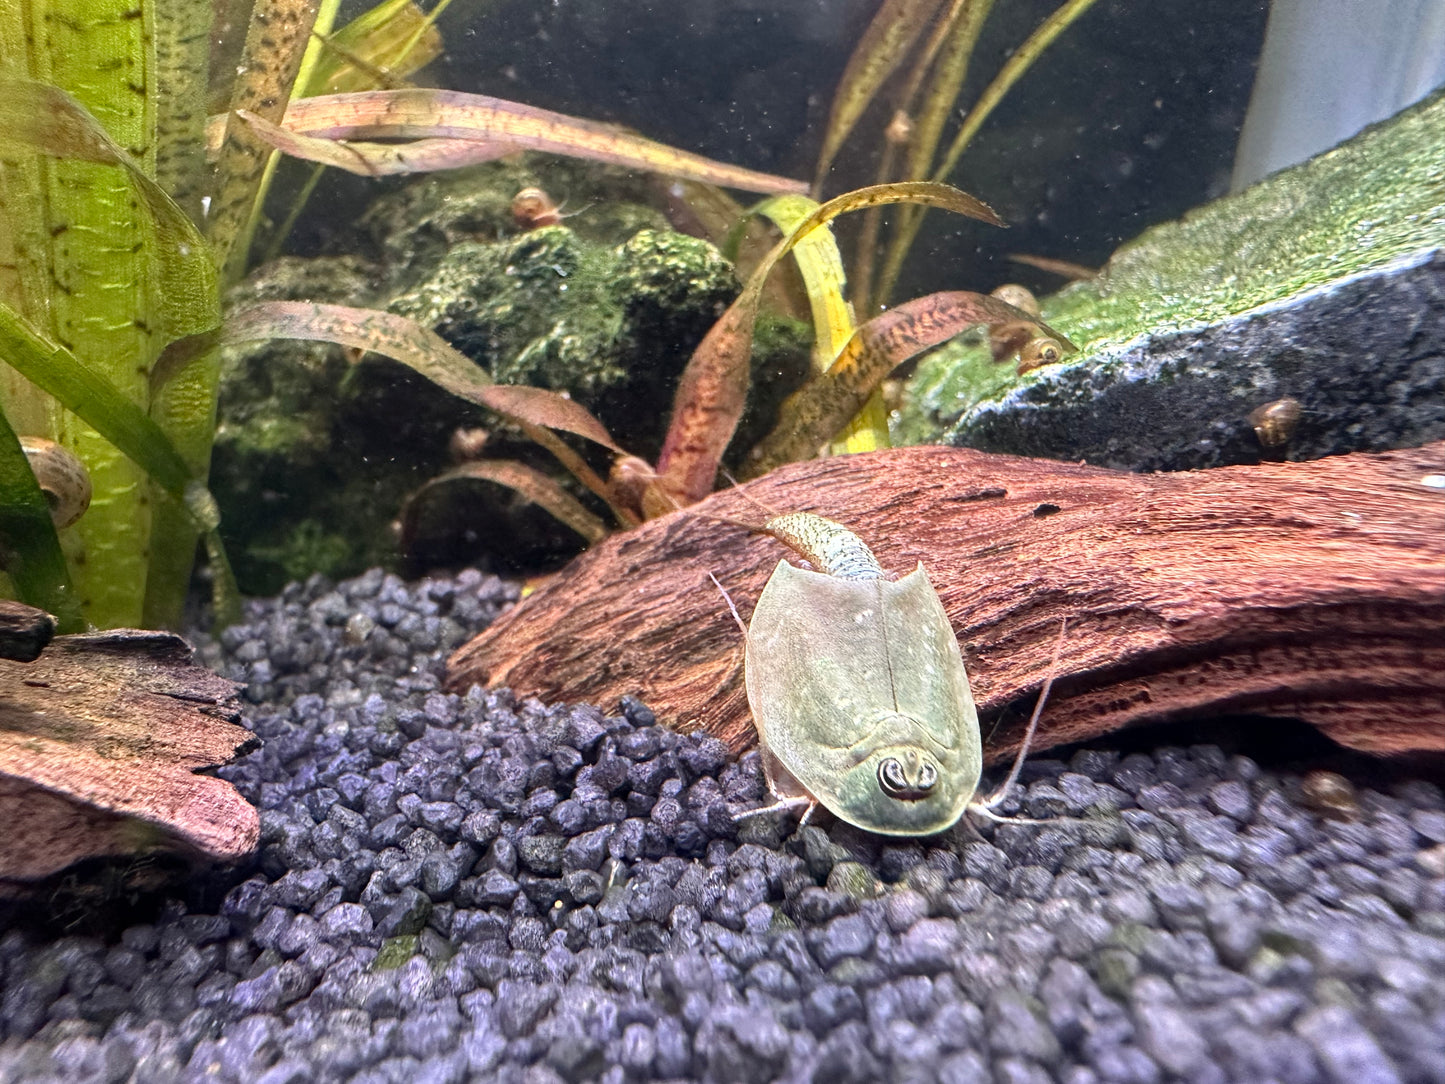 Breeding approach Triops Newberryi including food and instructions